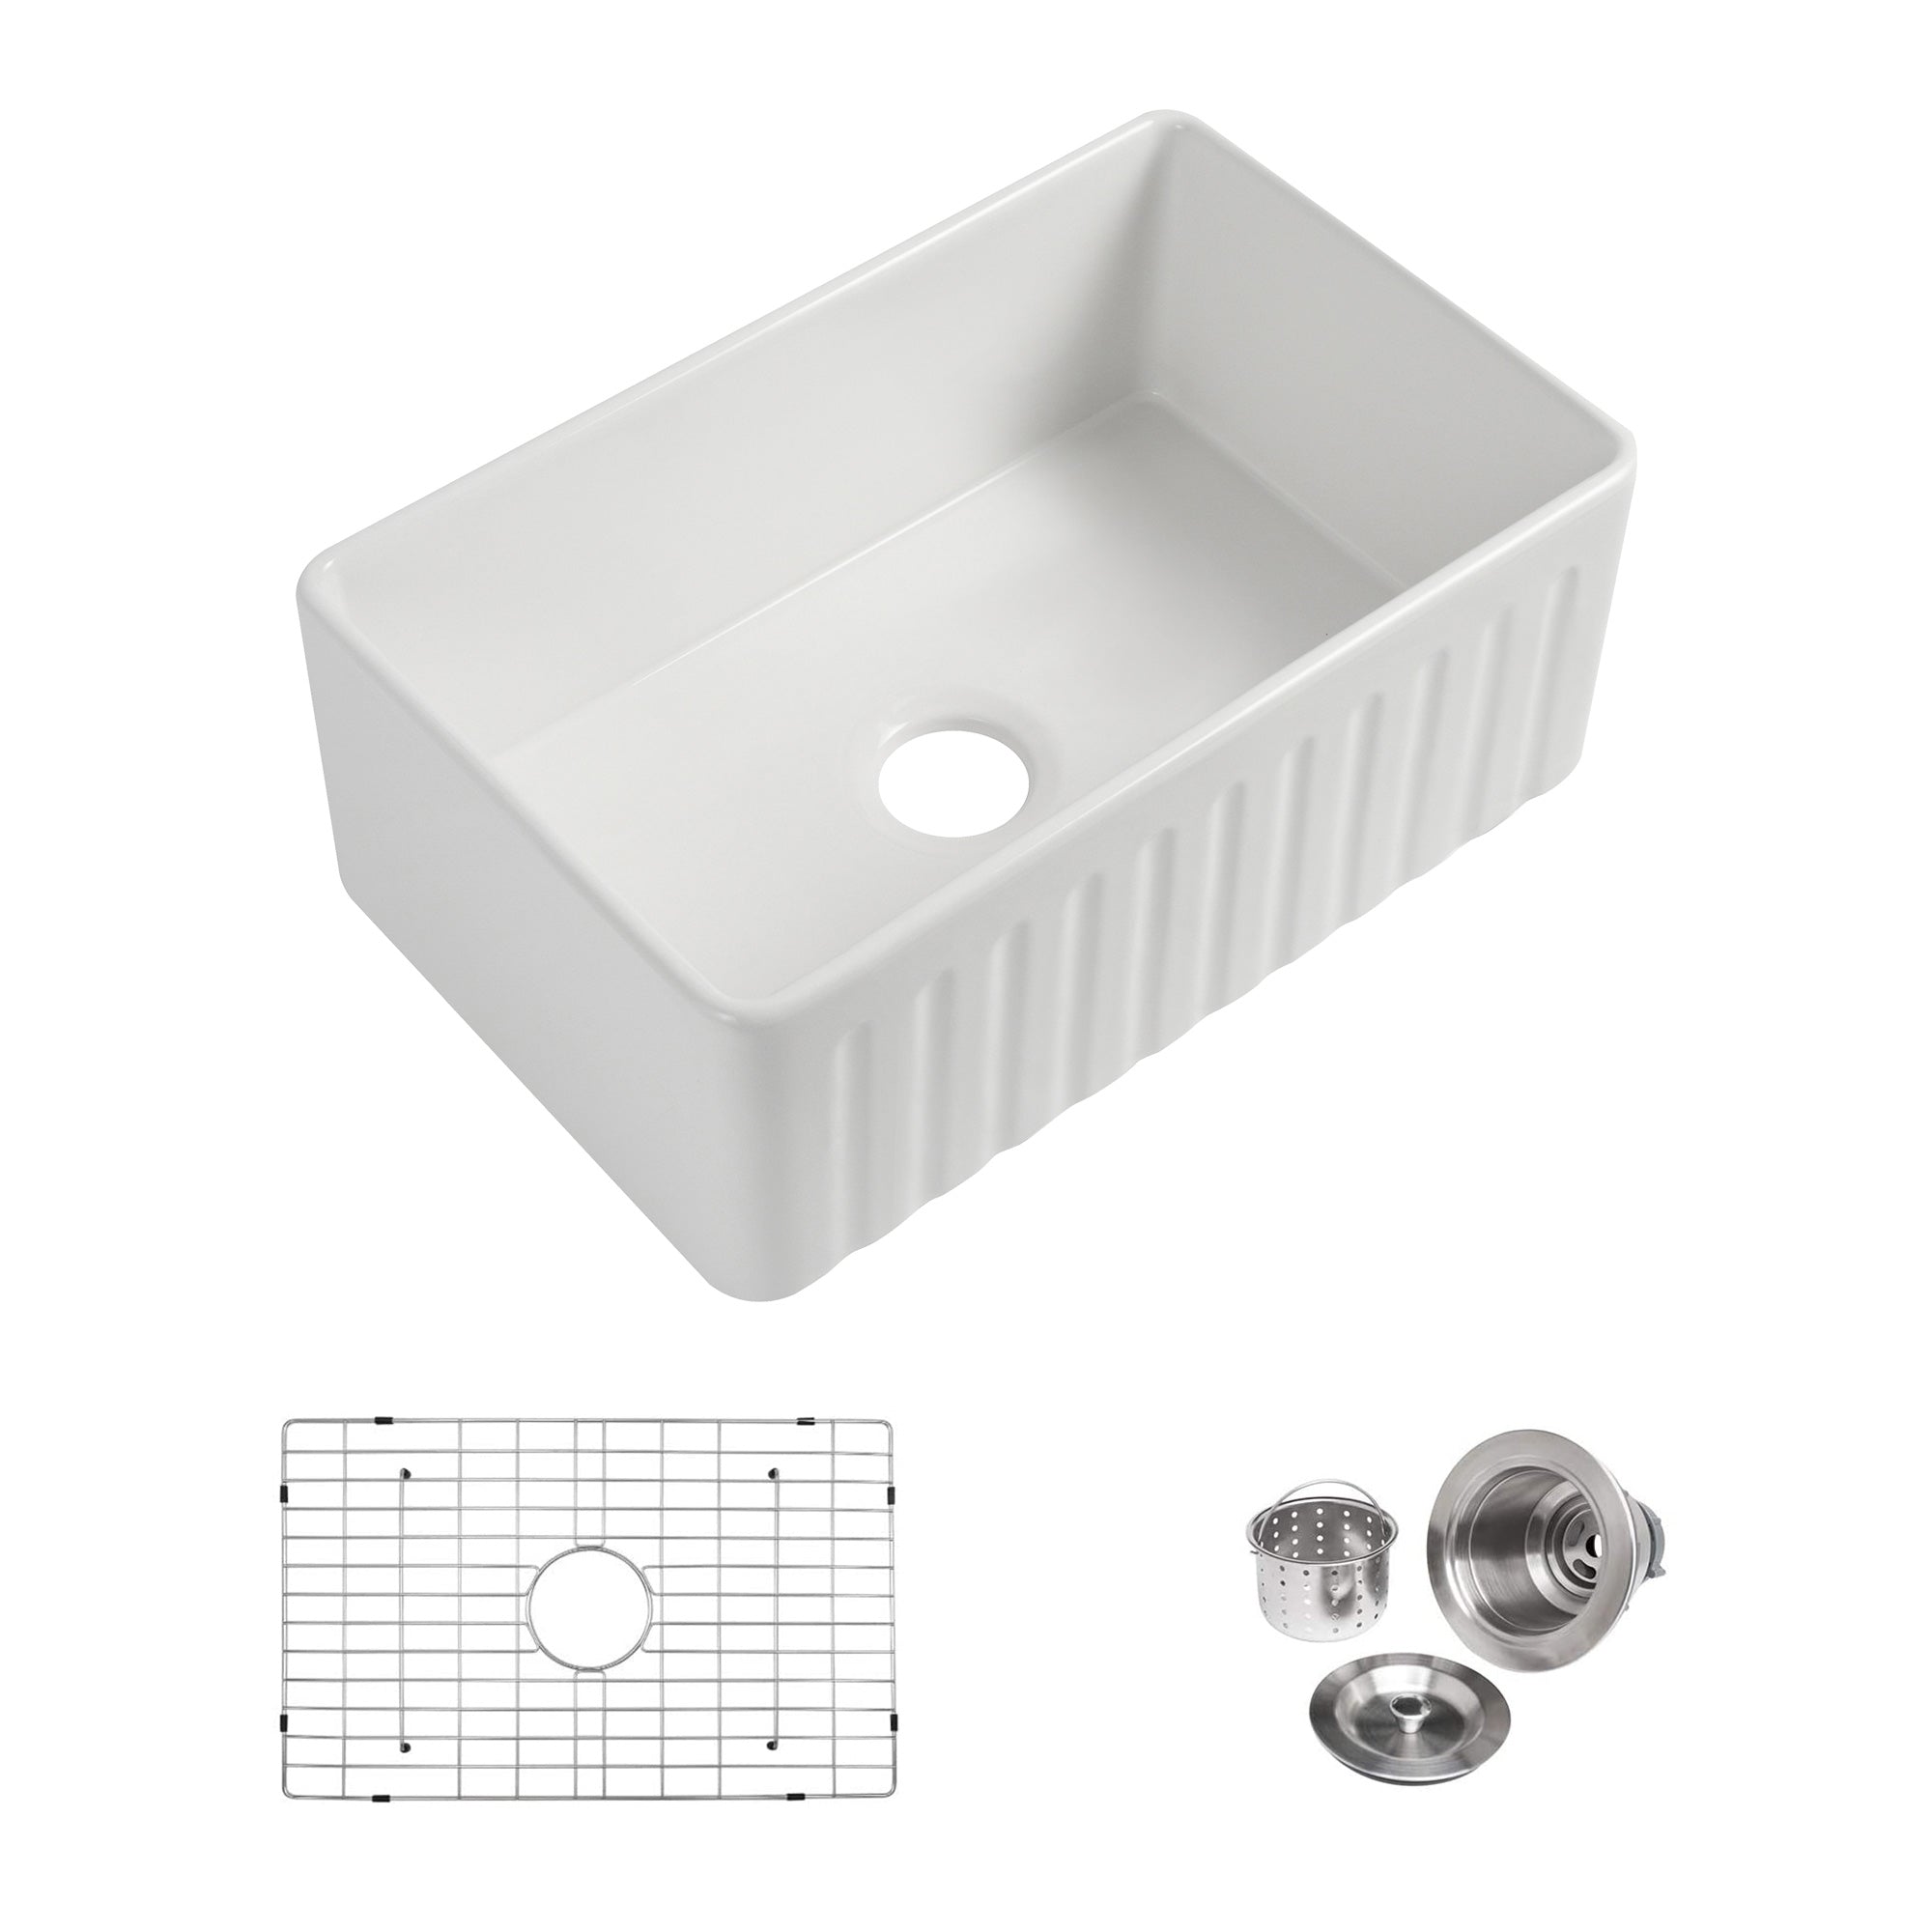 Fireclay Farmhouse Kitchen Sink with Grid and Strainer RX-FS04